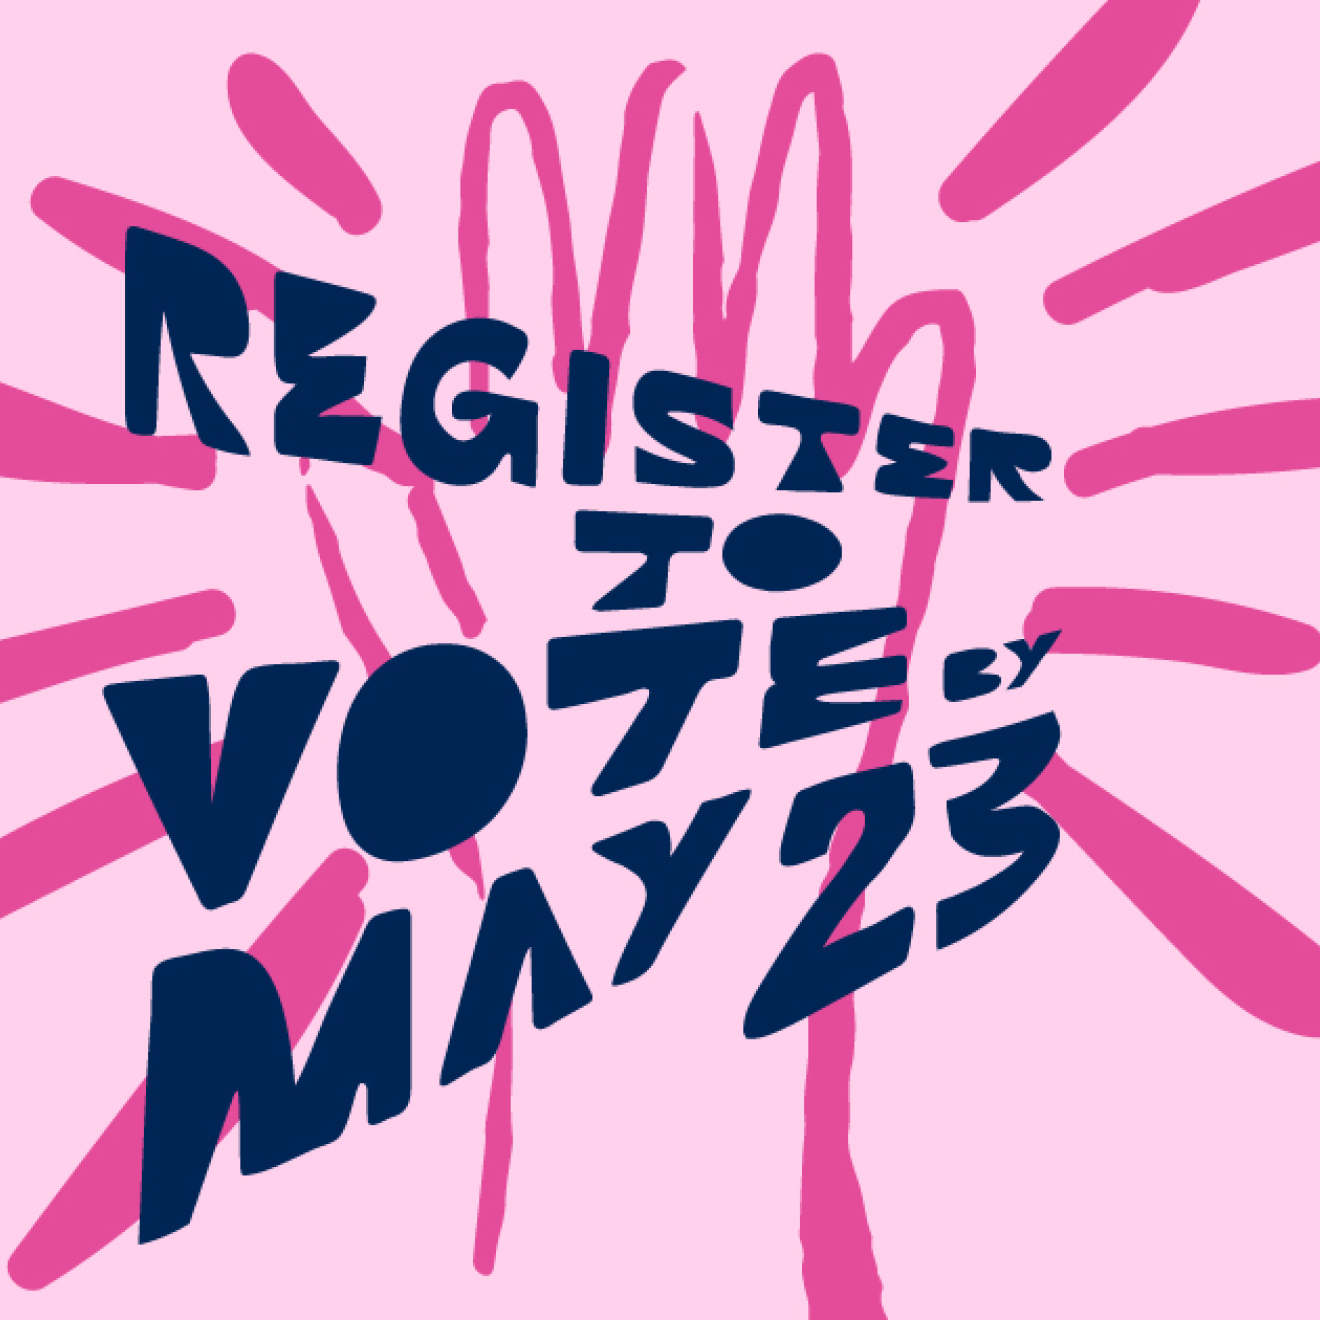 illustration with text: Register to vote by May 23